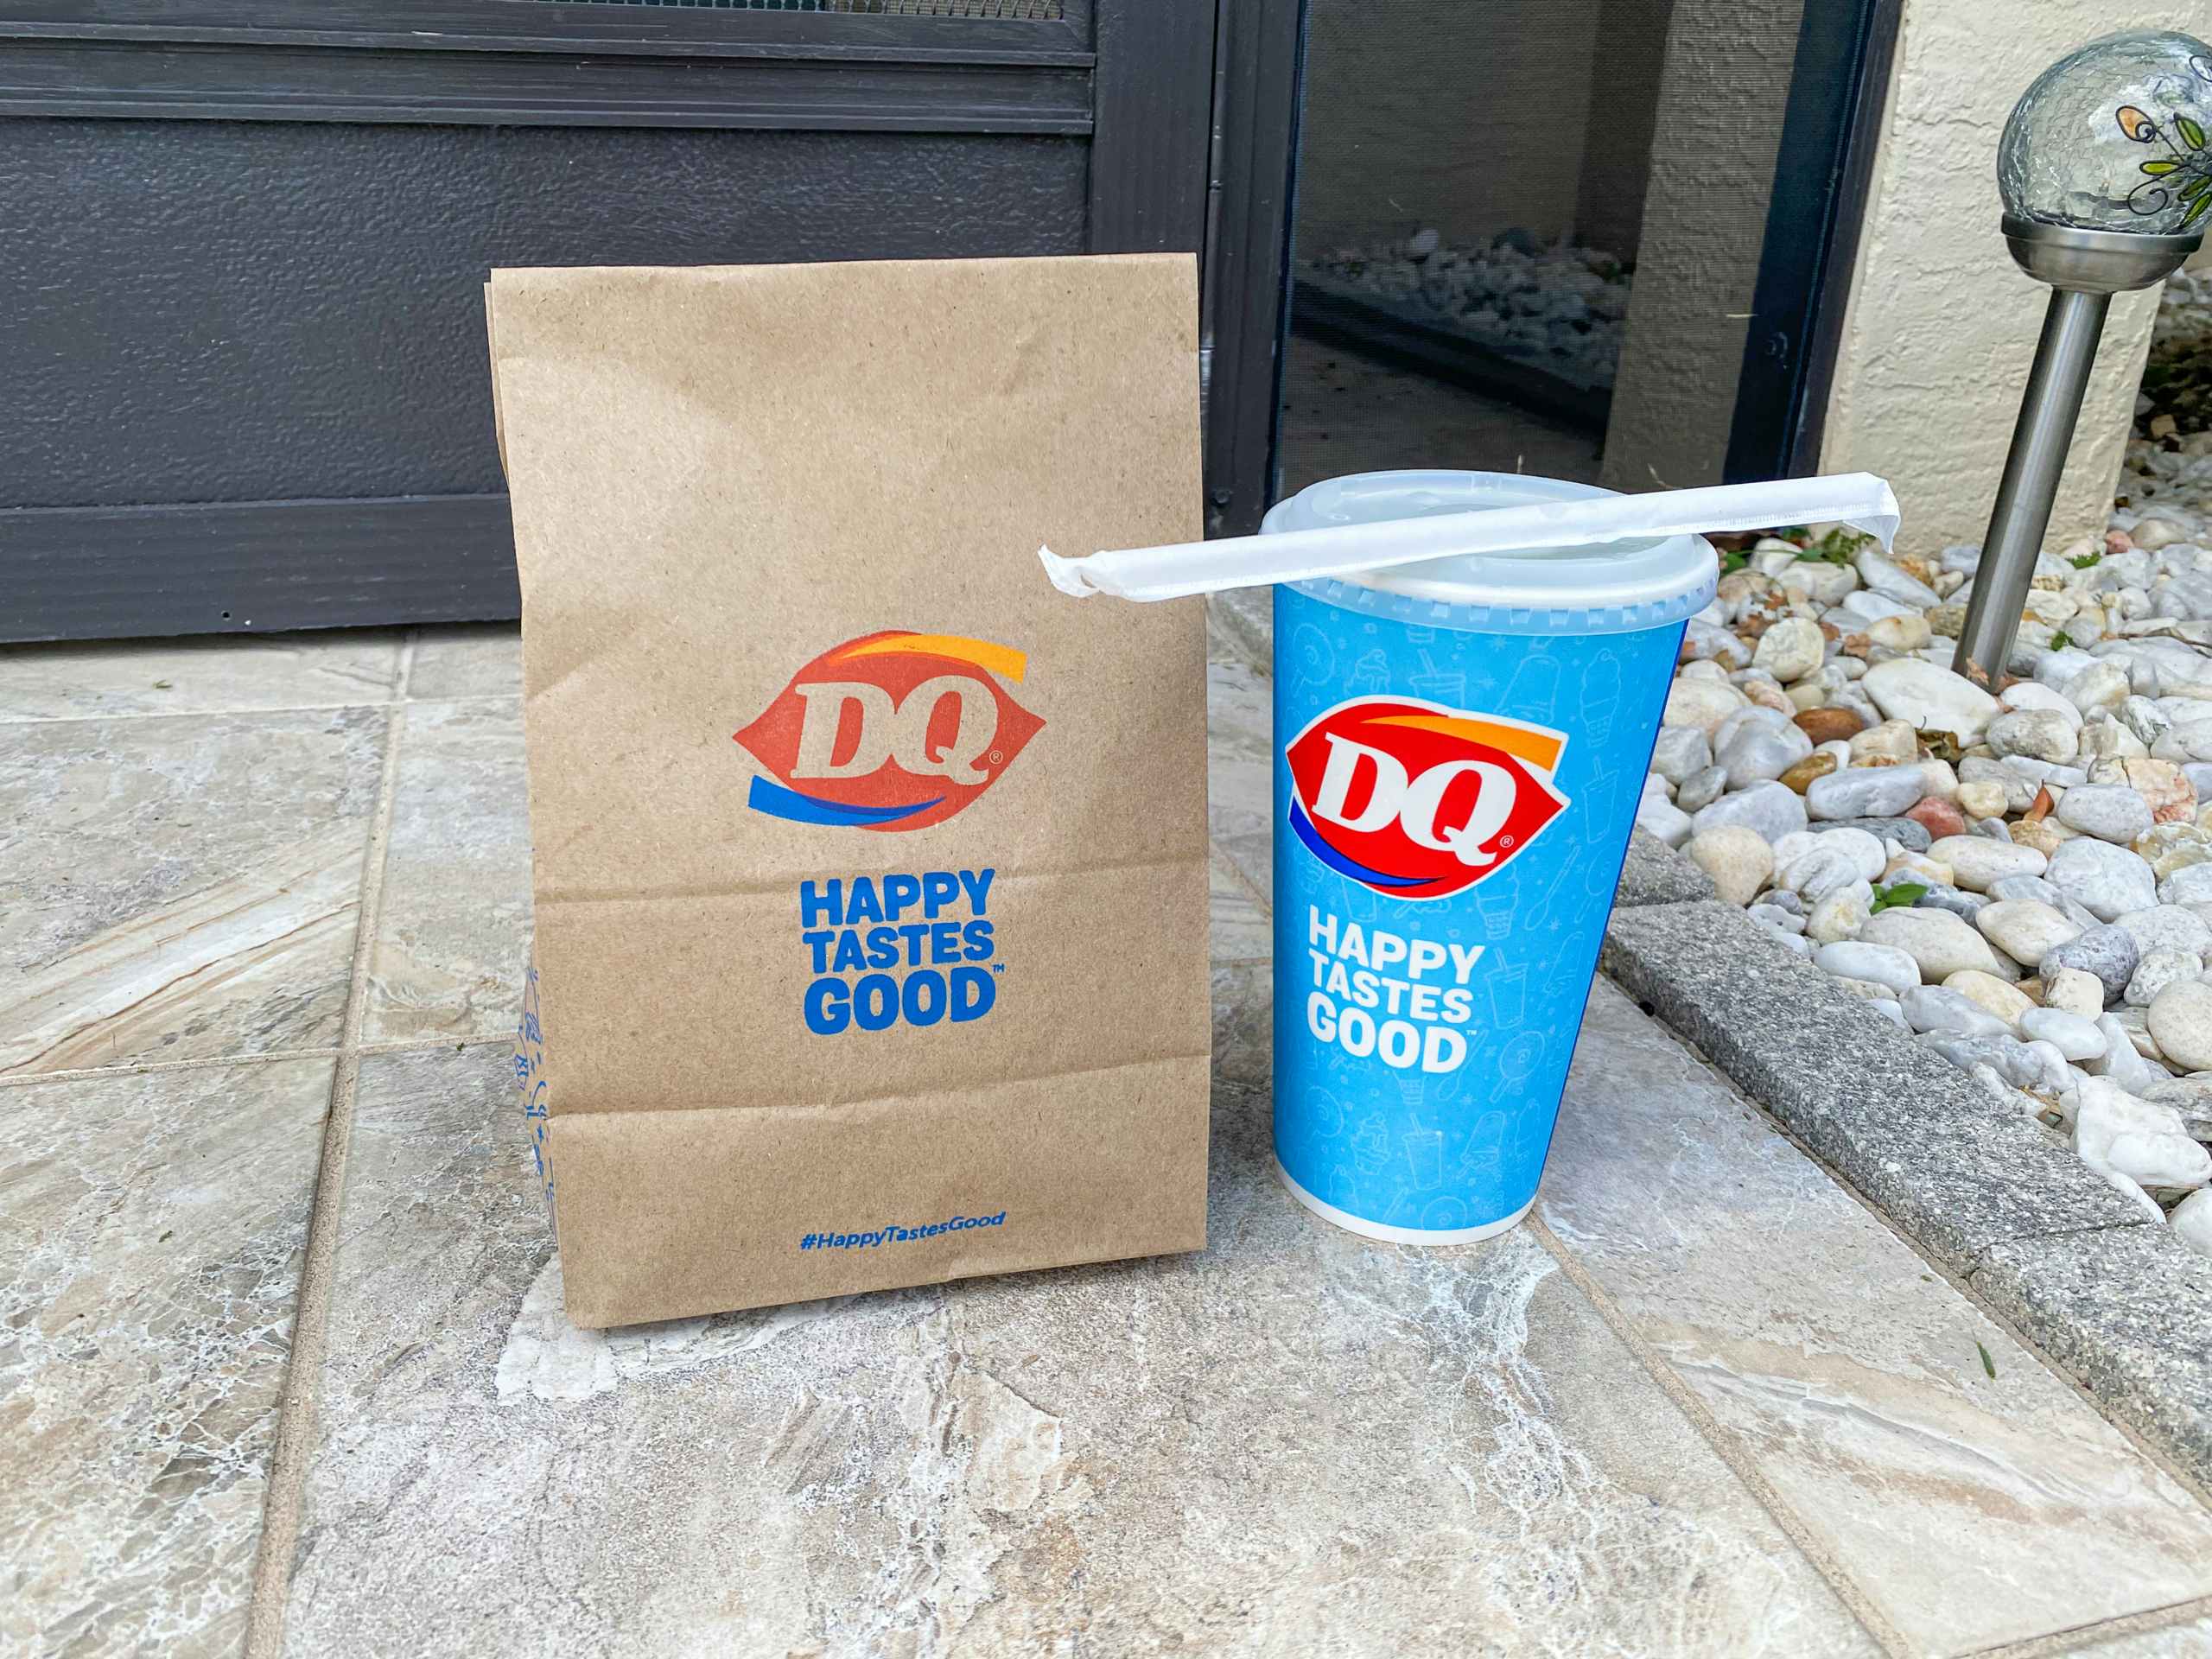 dairy-queen-dq-takeout-to-go-front-porch-uber-eats-doordash-delivery-2022-5-kcl-lp